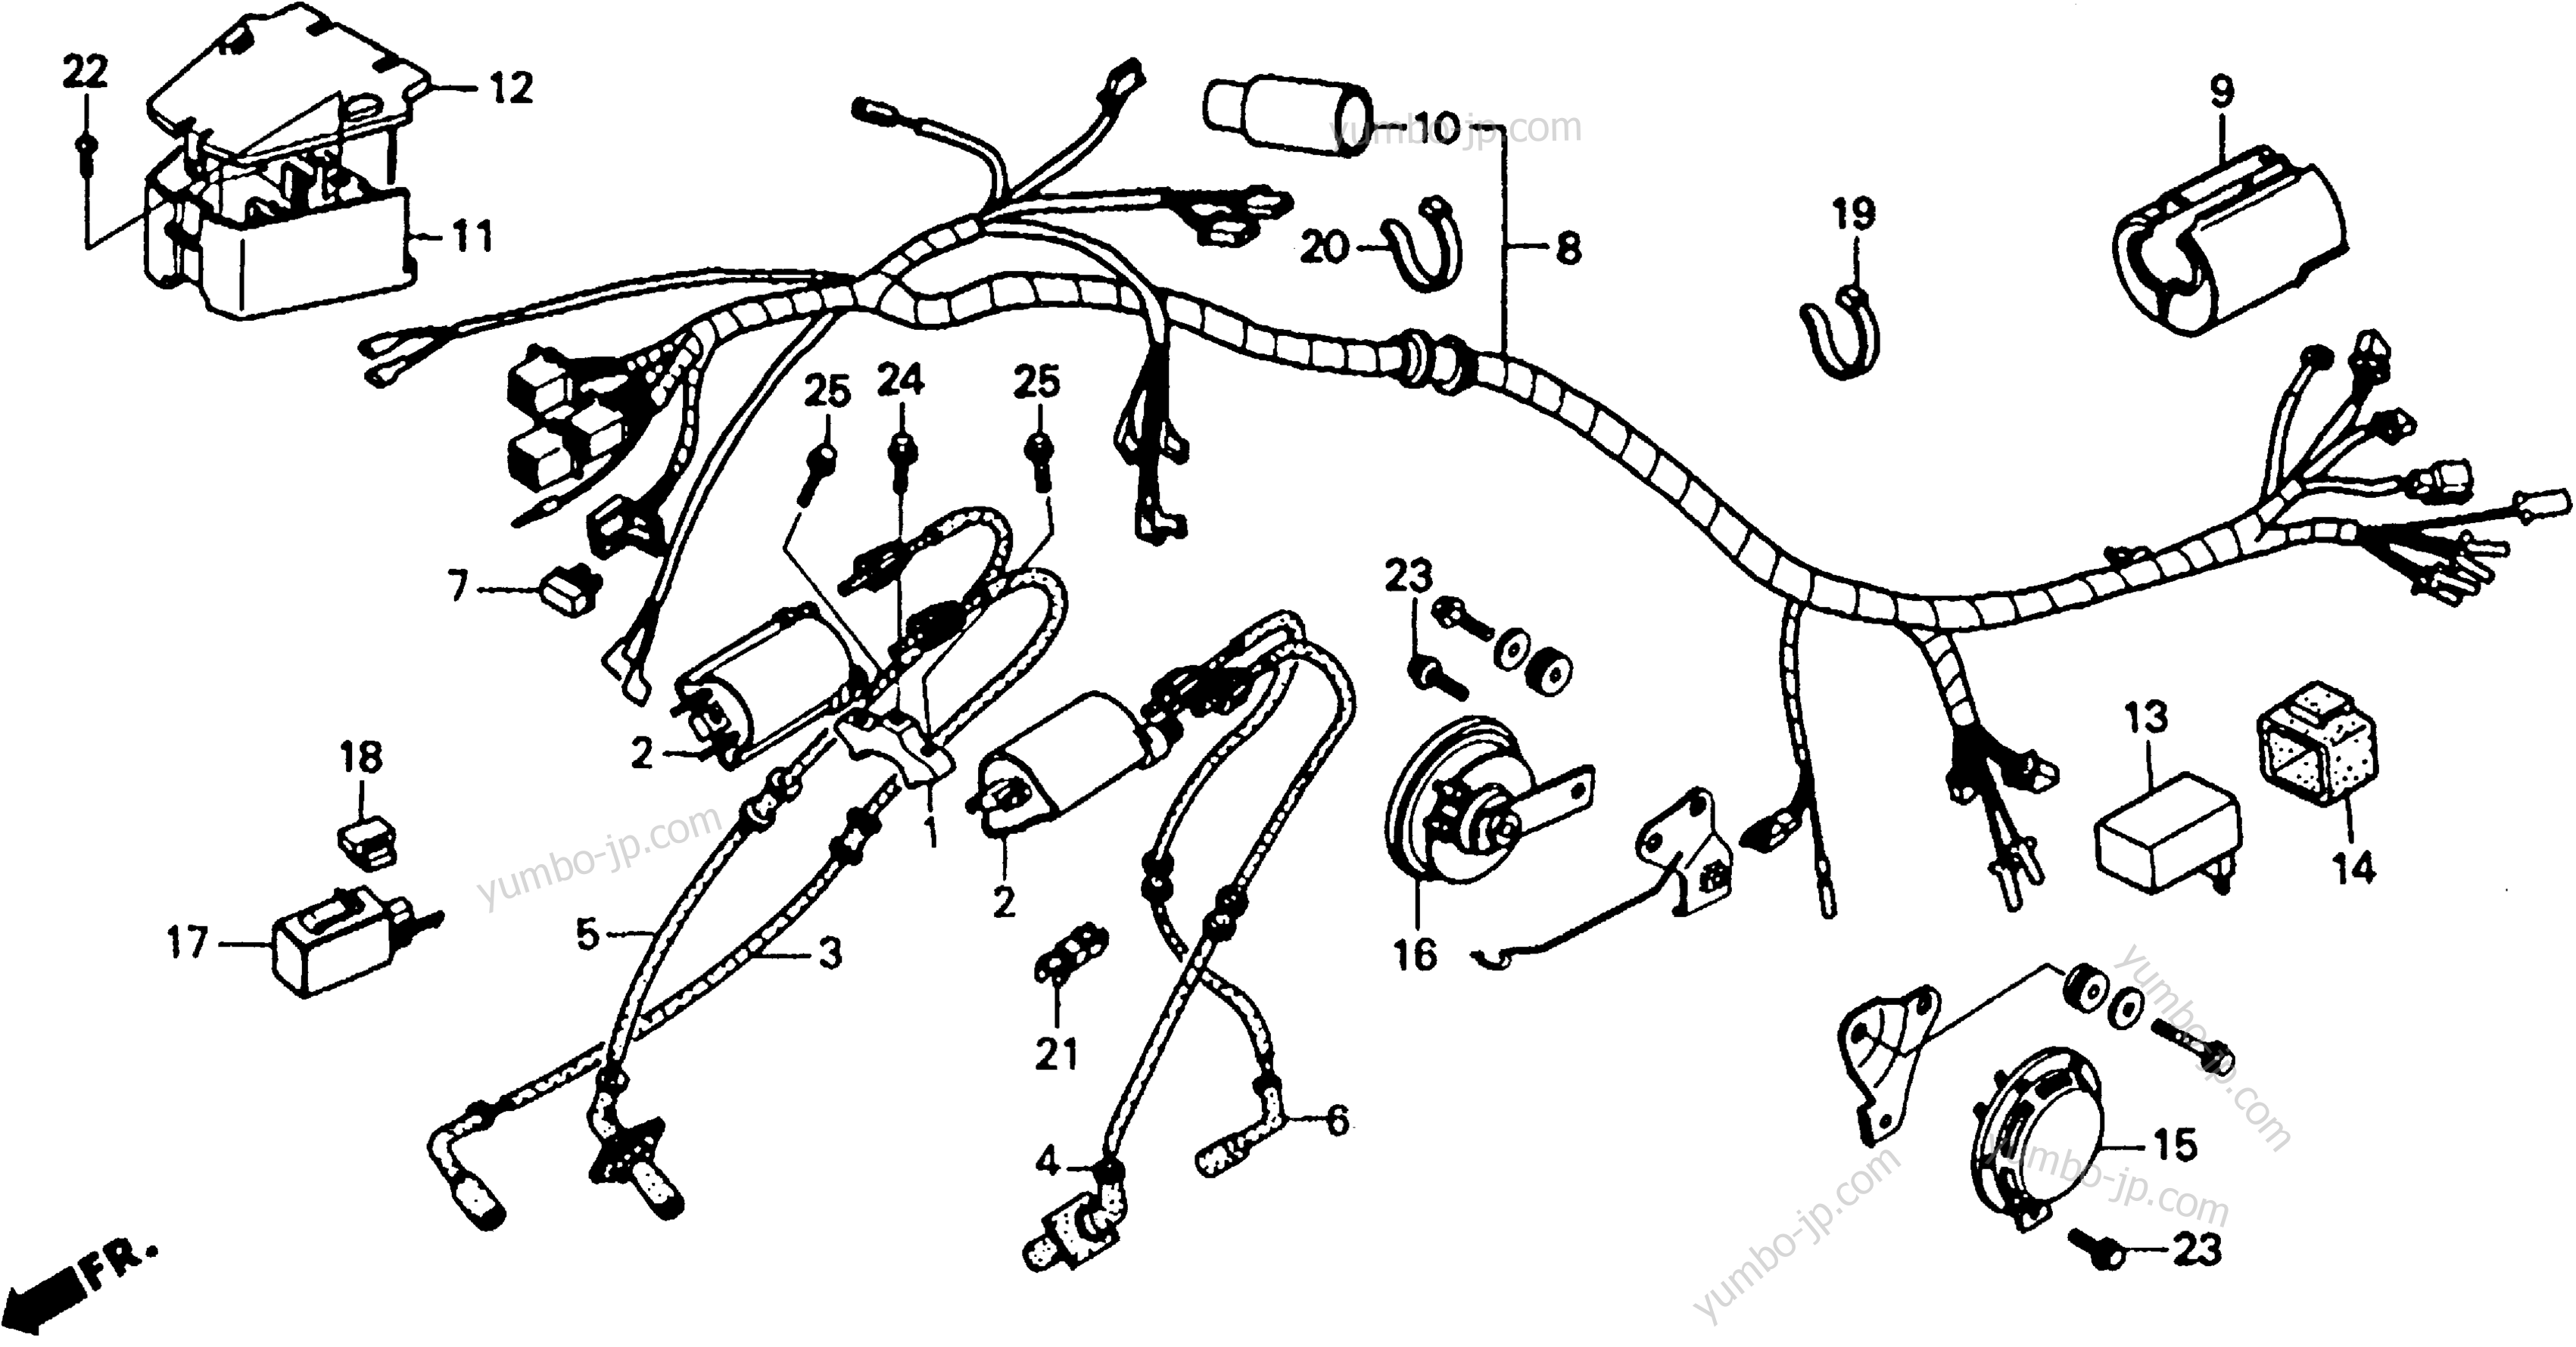 WIRE HARNESS for motorcycles HONDA VT1100C AC 1988 year